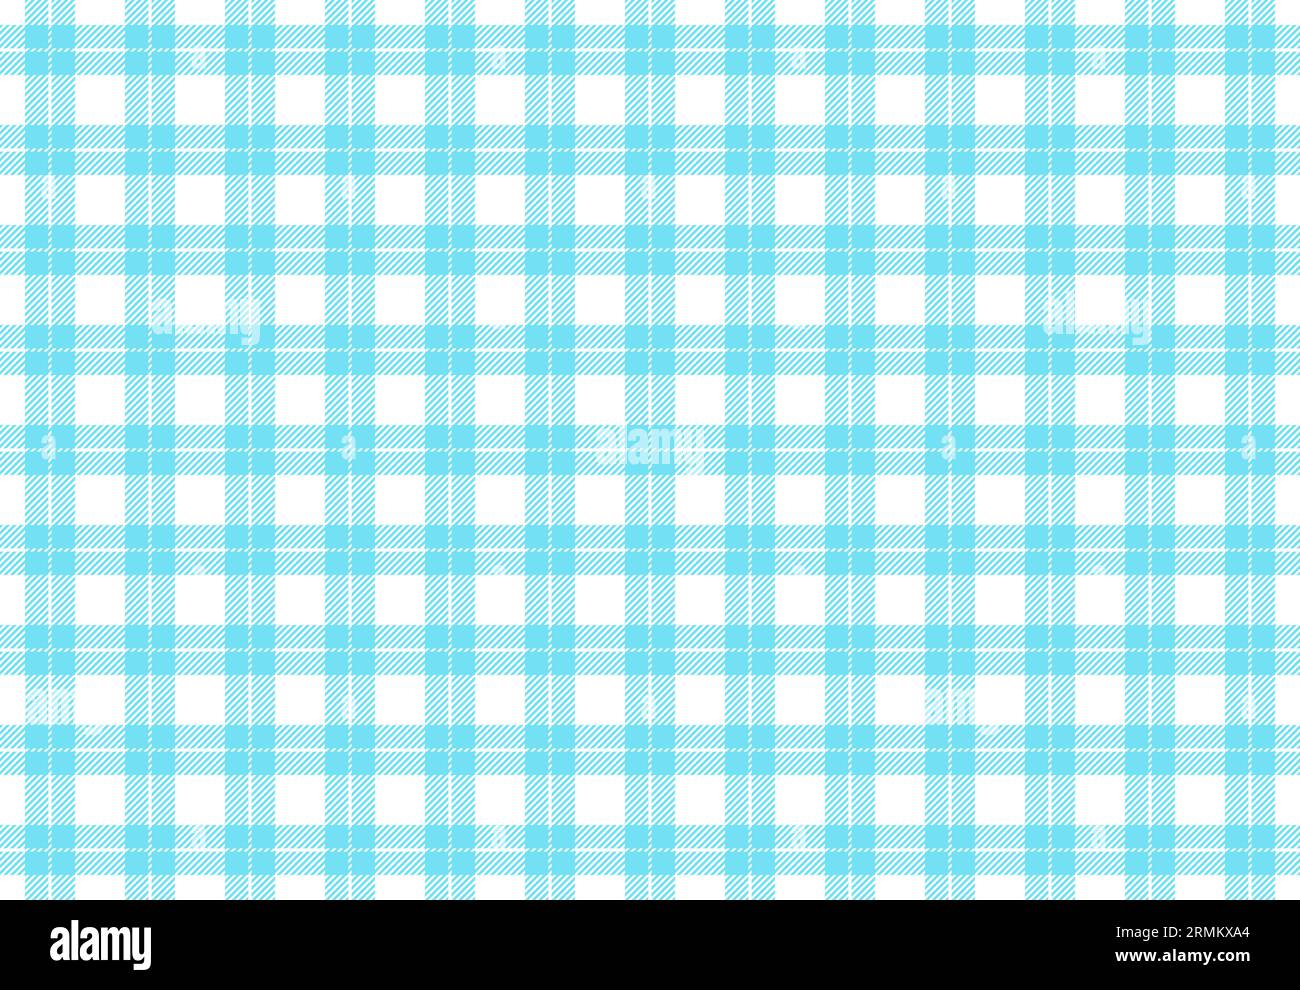 Buffalo plaid pattern woven from two different colors, light blue and white, creating a symmetrical arrangement of intersecting stripes Stock Photo